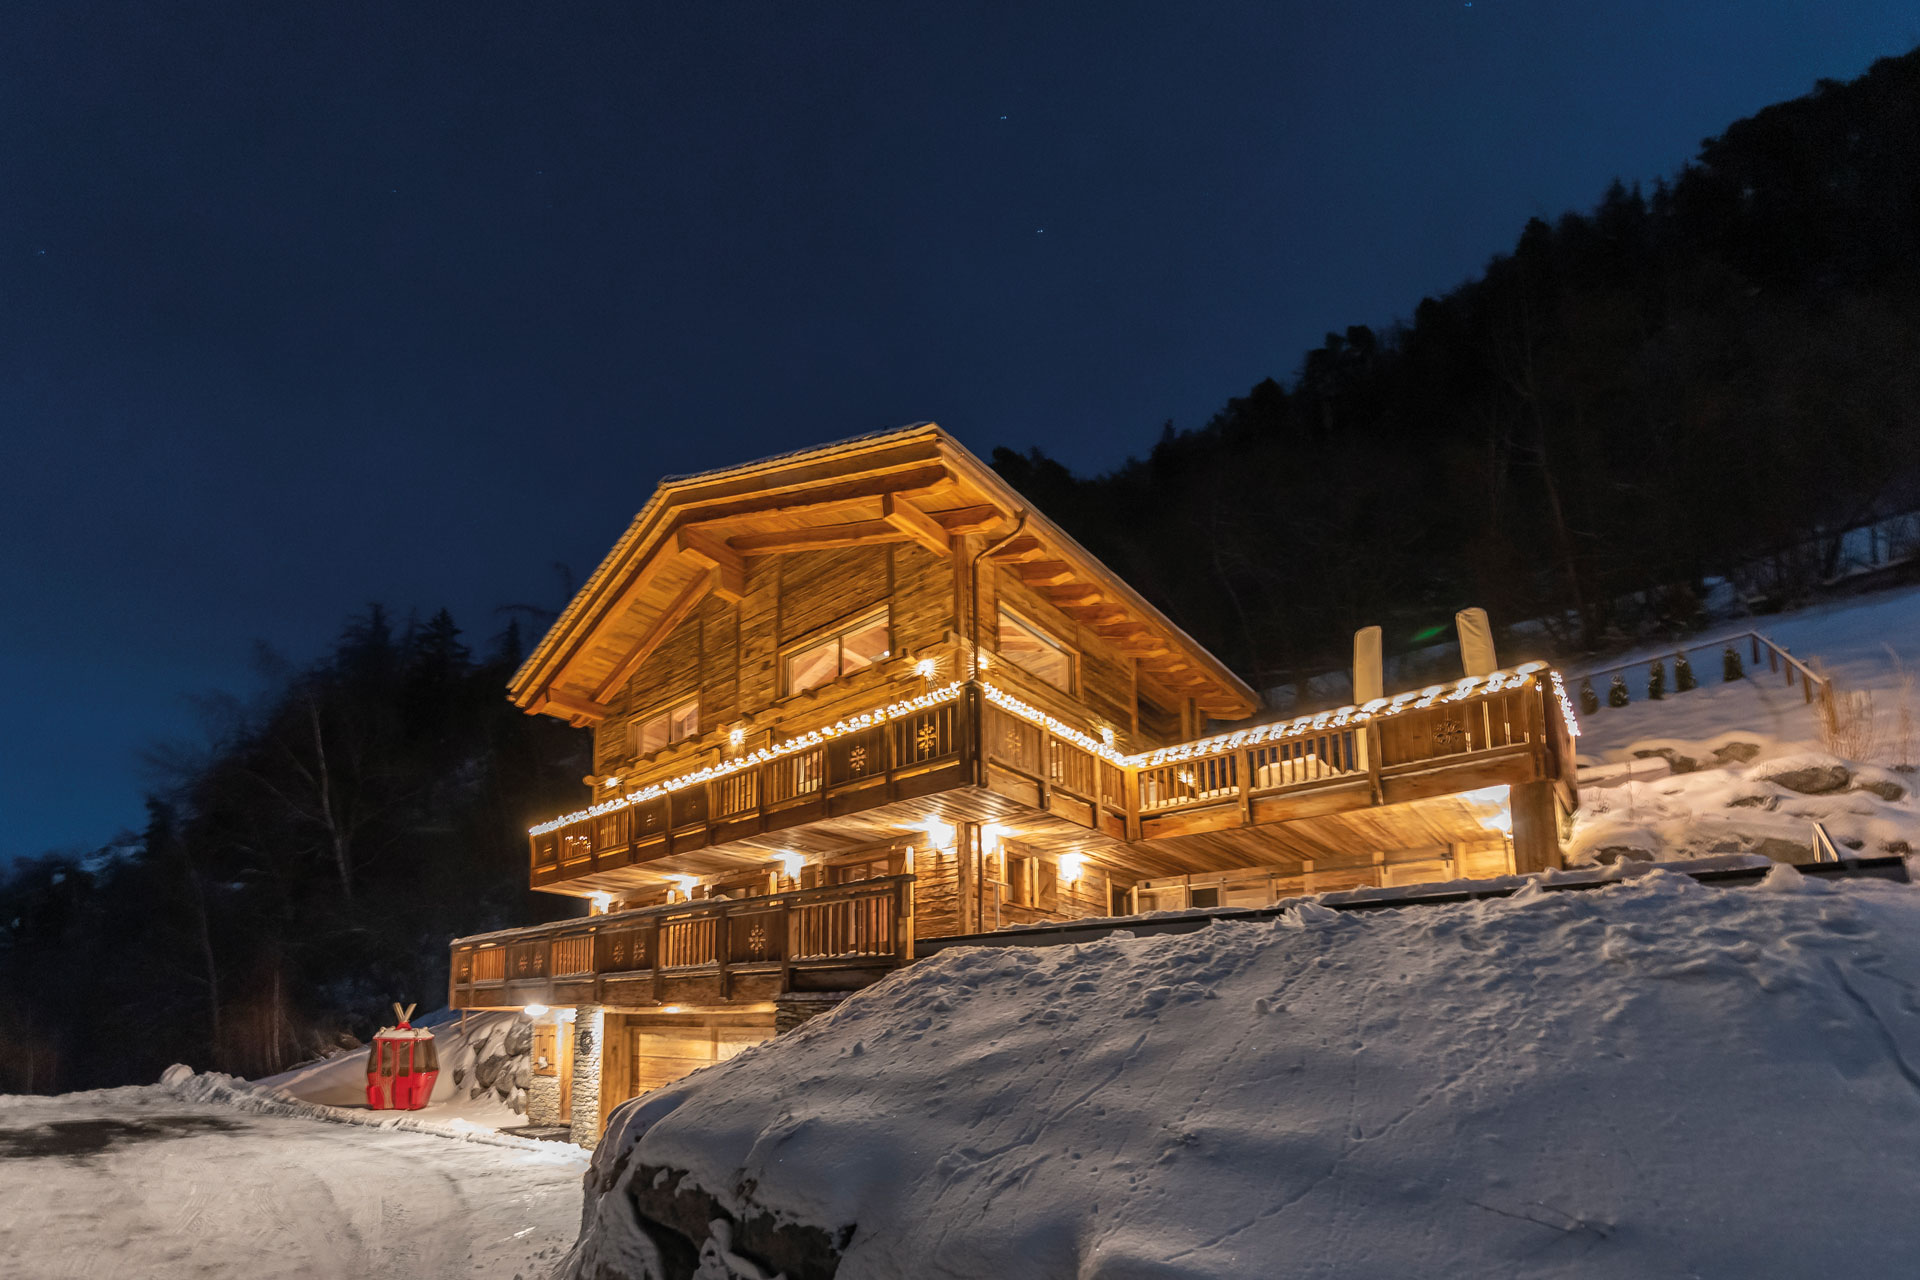 Chalet V is a timber building set in the snow, here lit up by underlighting